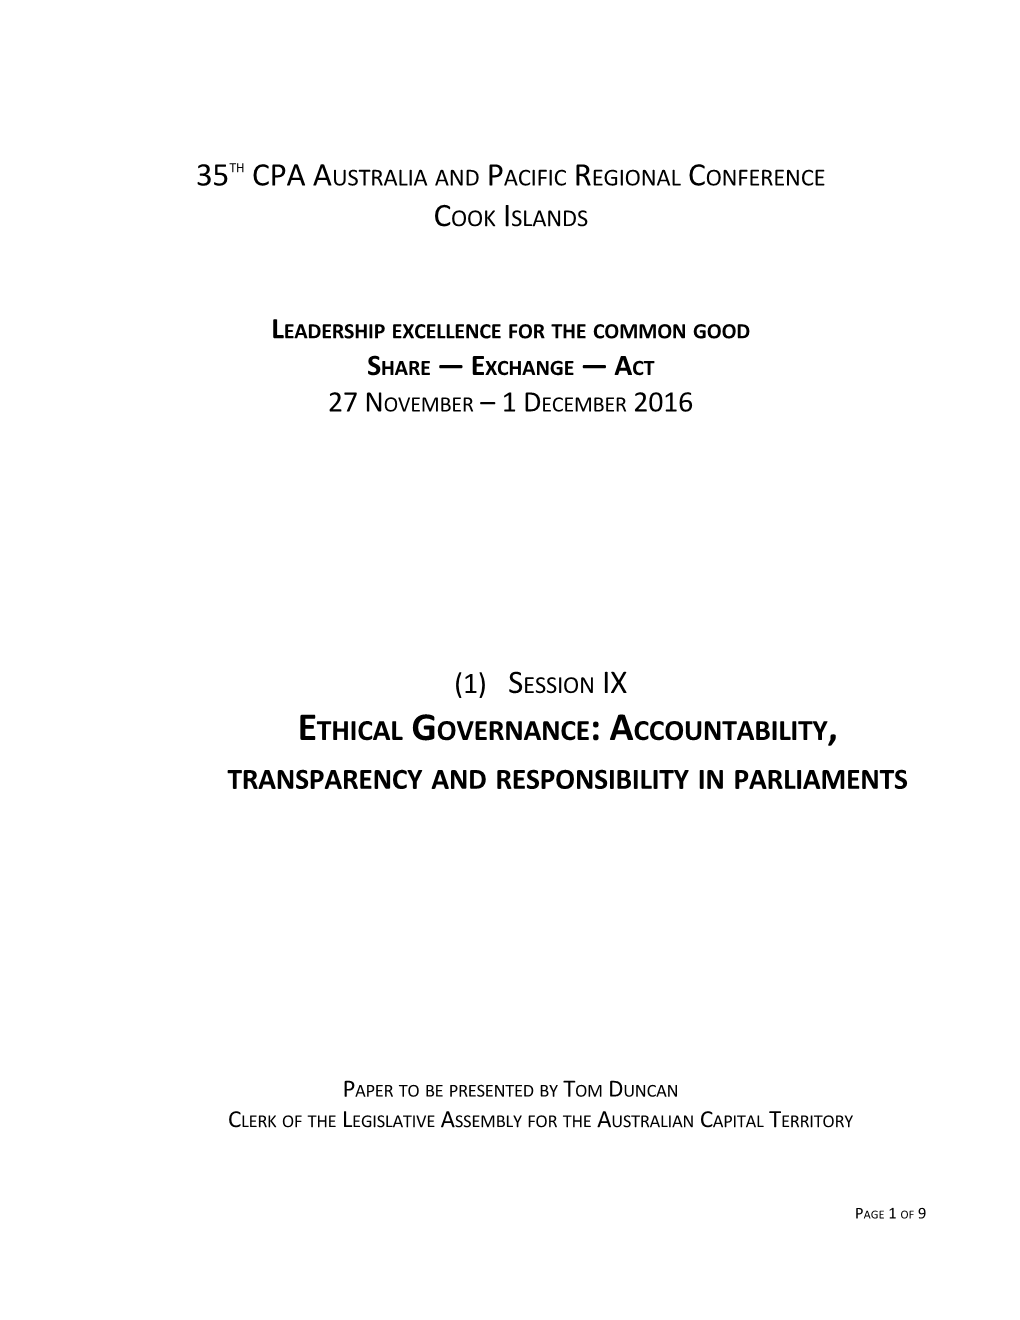 Session Ixethical Governance: Accountability, Transparency and Responsibility in Parliaments